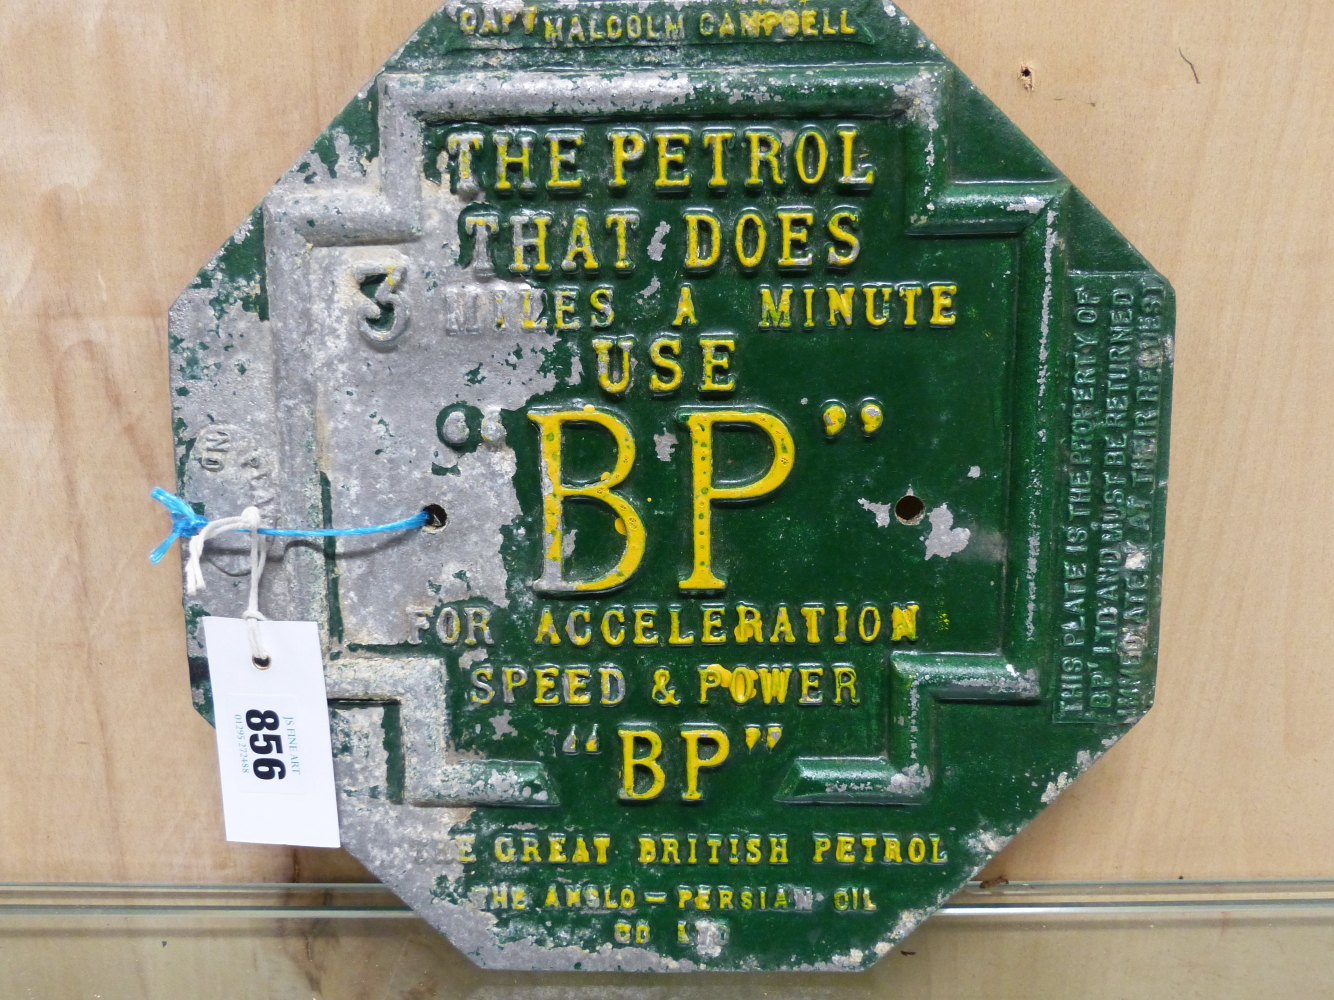 A GREEN AND YELLOW PAINTED HEXAGONAL ALUMINIUM BP ADVERTISING PLAQUE, THE PETROL THAT DOES 3 MILES A